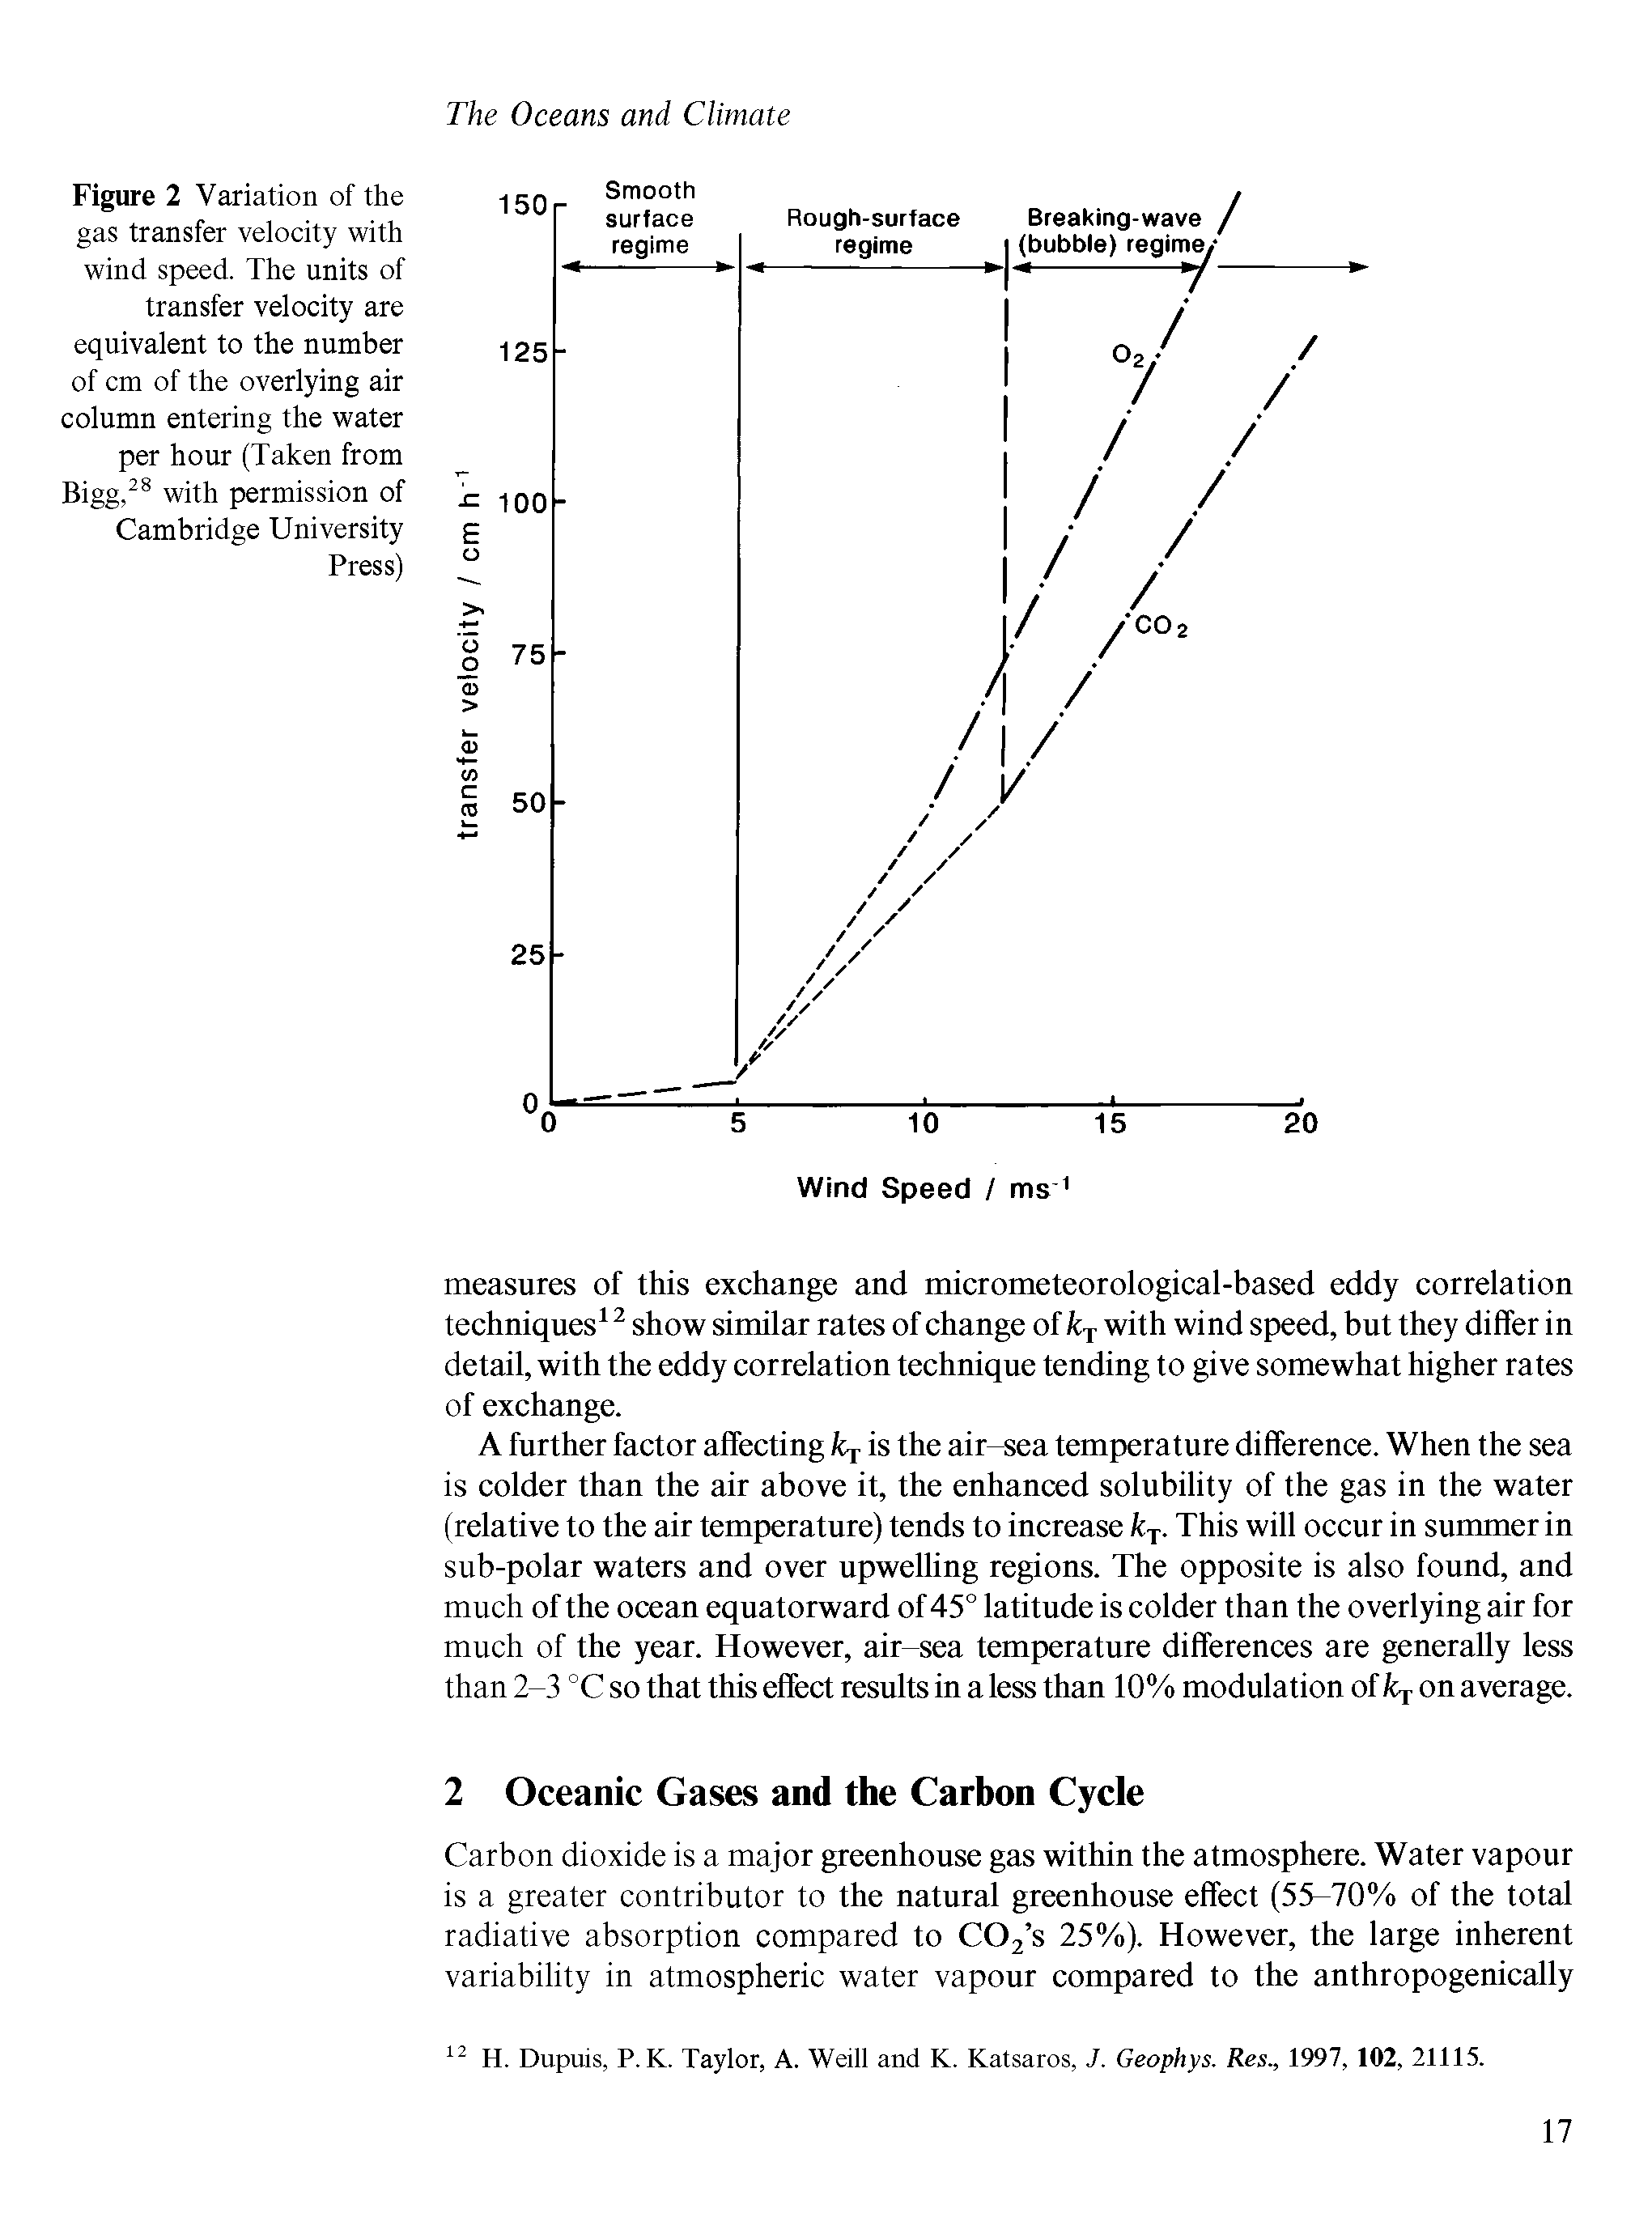 Figure 2 Variation of the gas transfer velocity with wind speed. The units of transfer velocity are equivalent to the number of cm of the overlying air column entering the water per hour (Taken from Bigg,28 with permission of Cambridge University Press)...